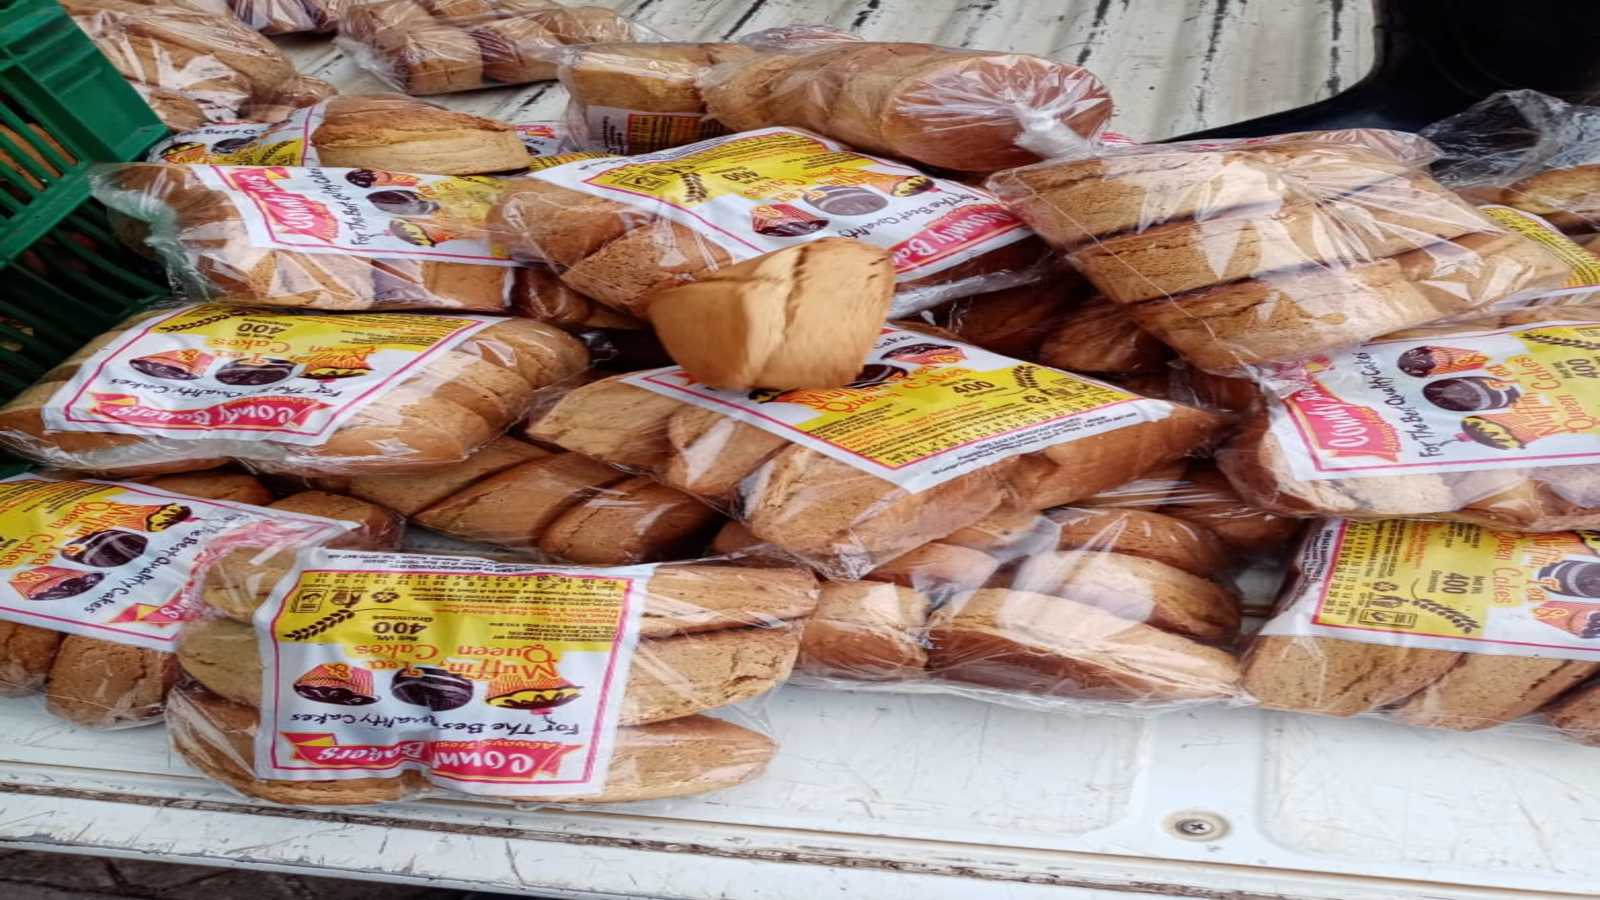 KEBS seizes products due to out-of-date permits